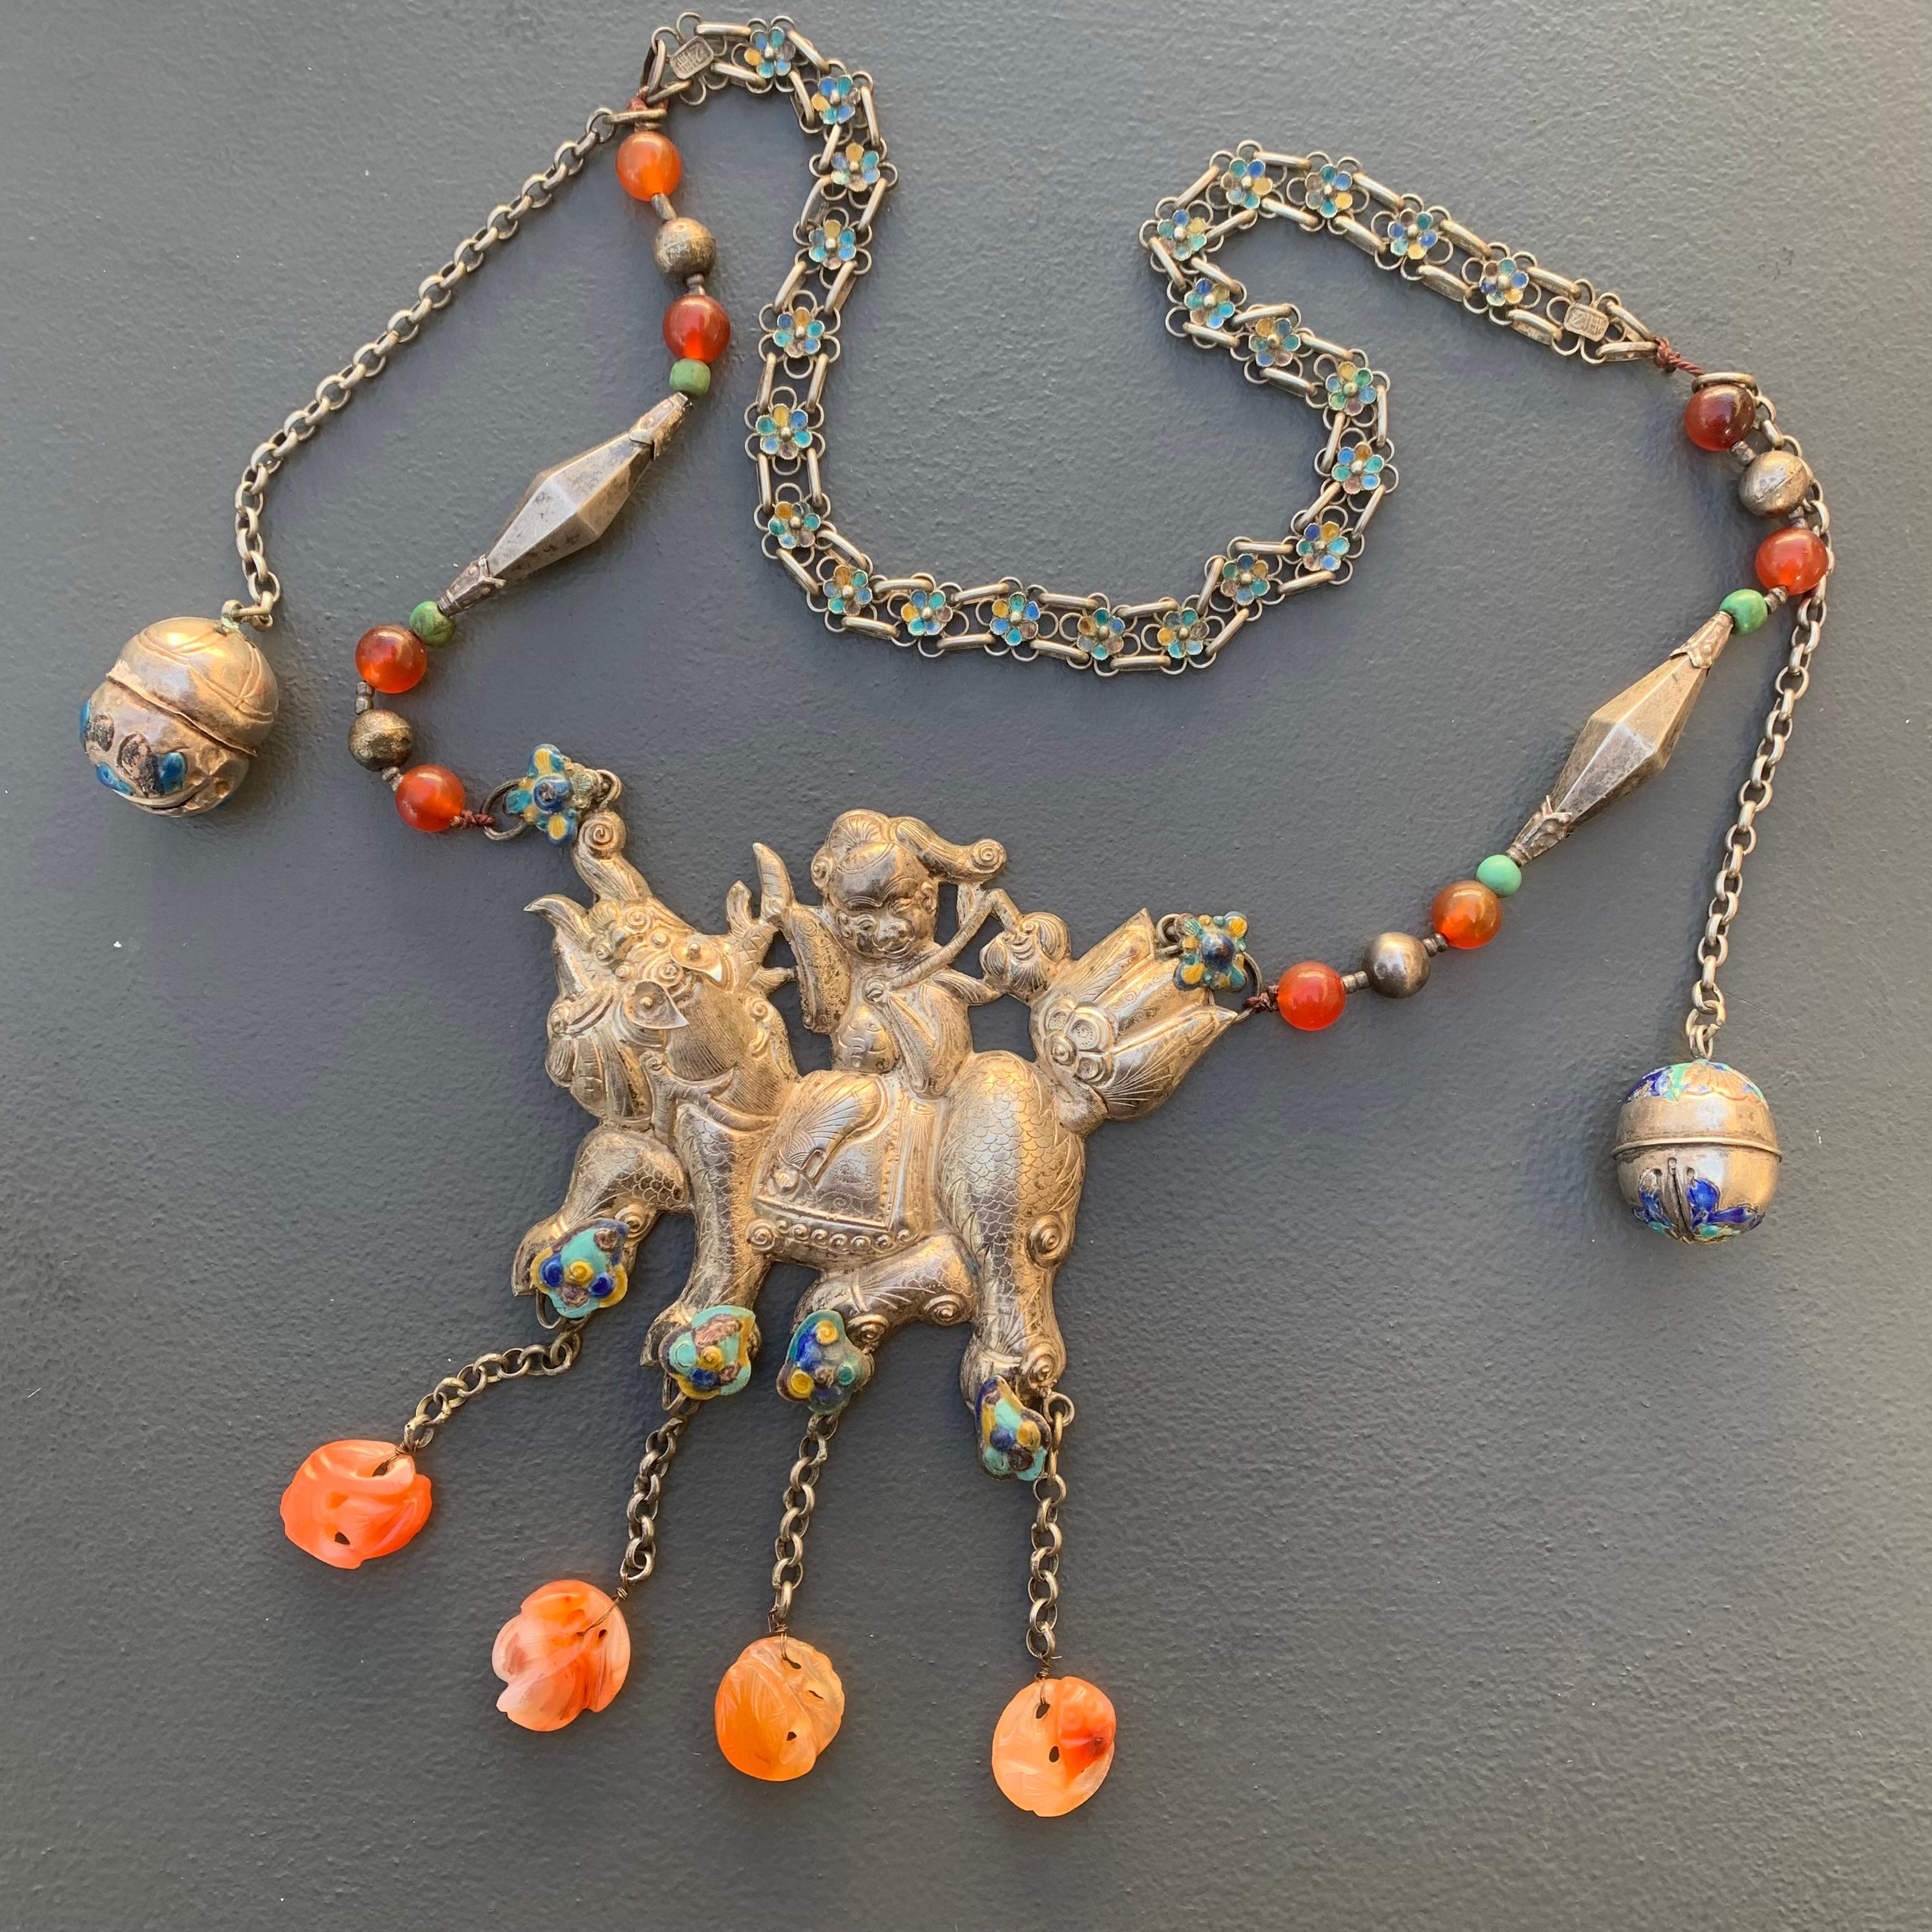 MASSIVE Old Chinese or Mongolian Silver statement necklace with a large stamped  pendant featuring a boy riding what looks like   guardian lion . Necklace chain is  made of  carnelian  , turquoise beads and conical  silver bead in between and a